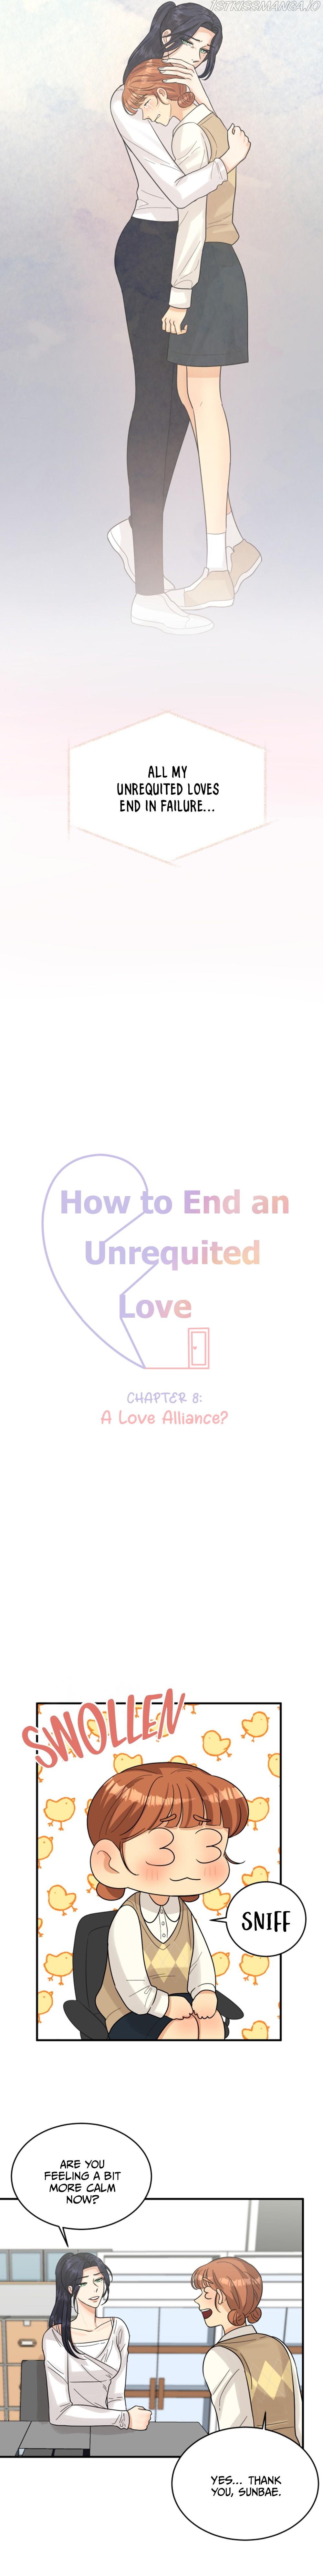 How to End an Unrequited Love chapter 8